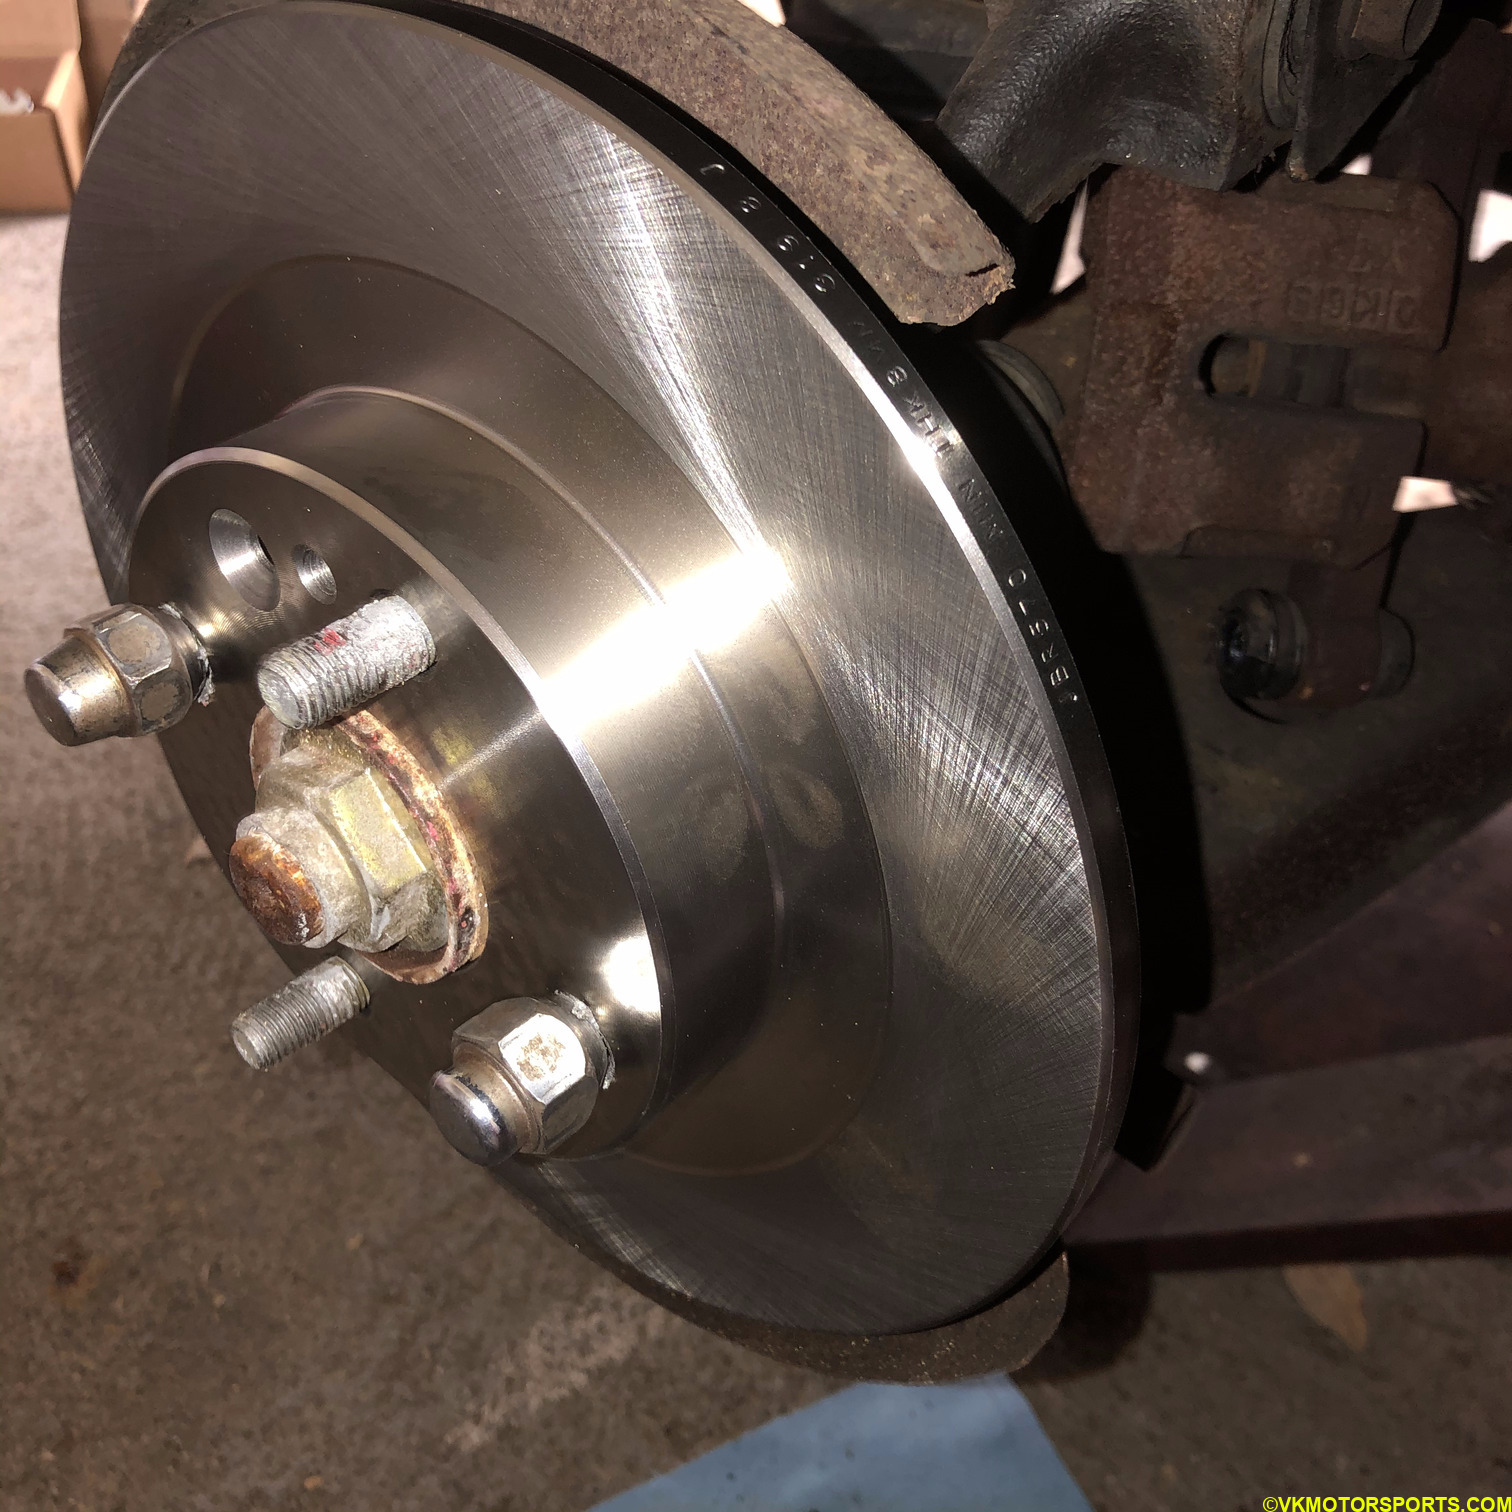 Place new rotor on the wheel hub and hold it in place with 2 lug nuts